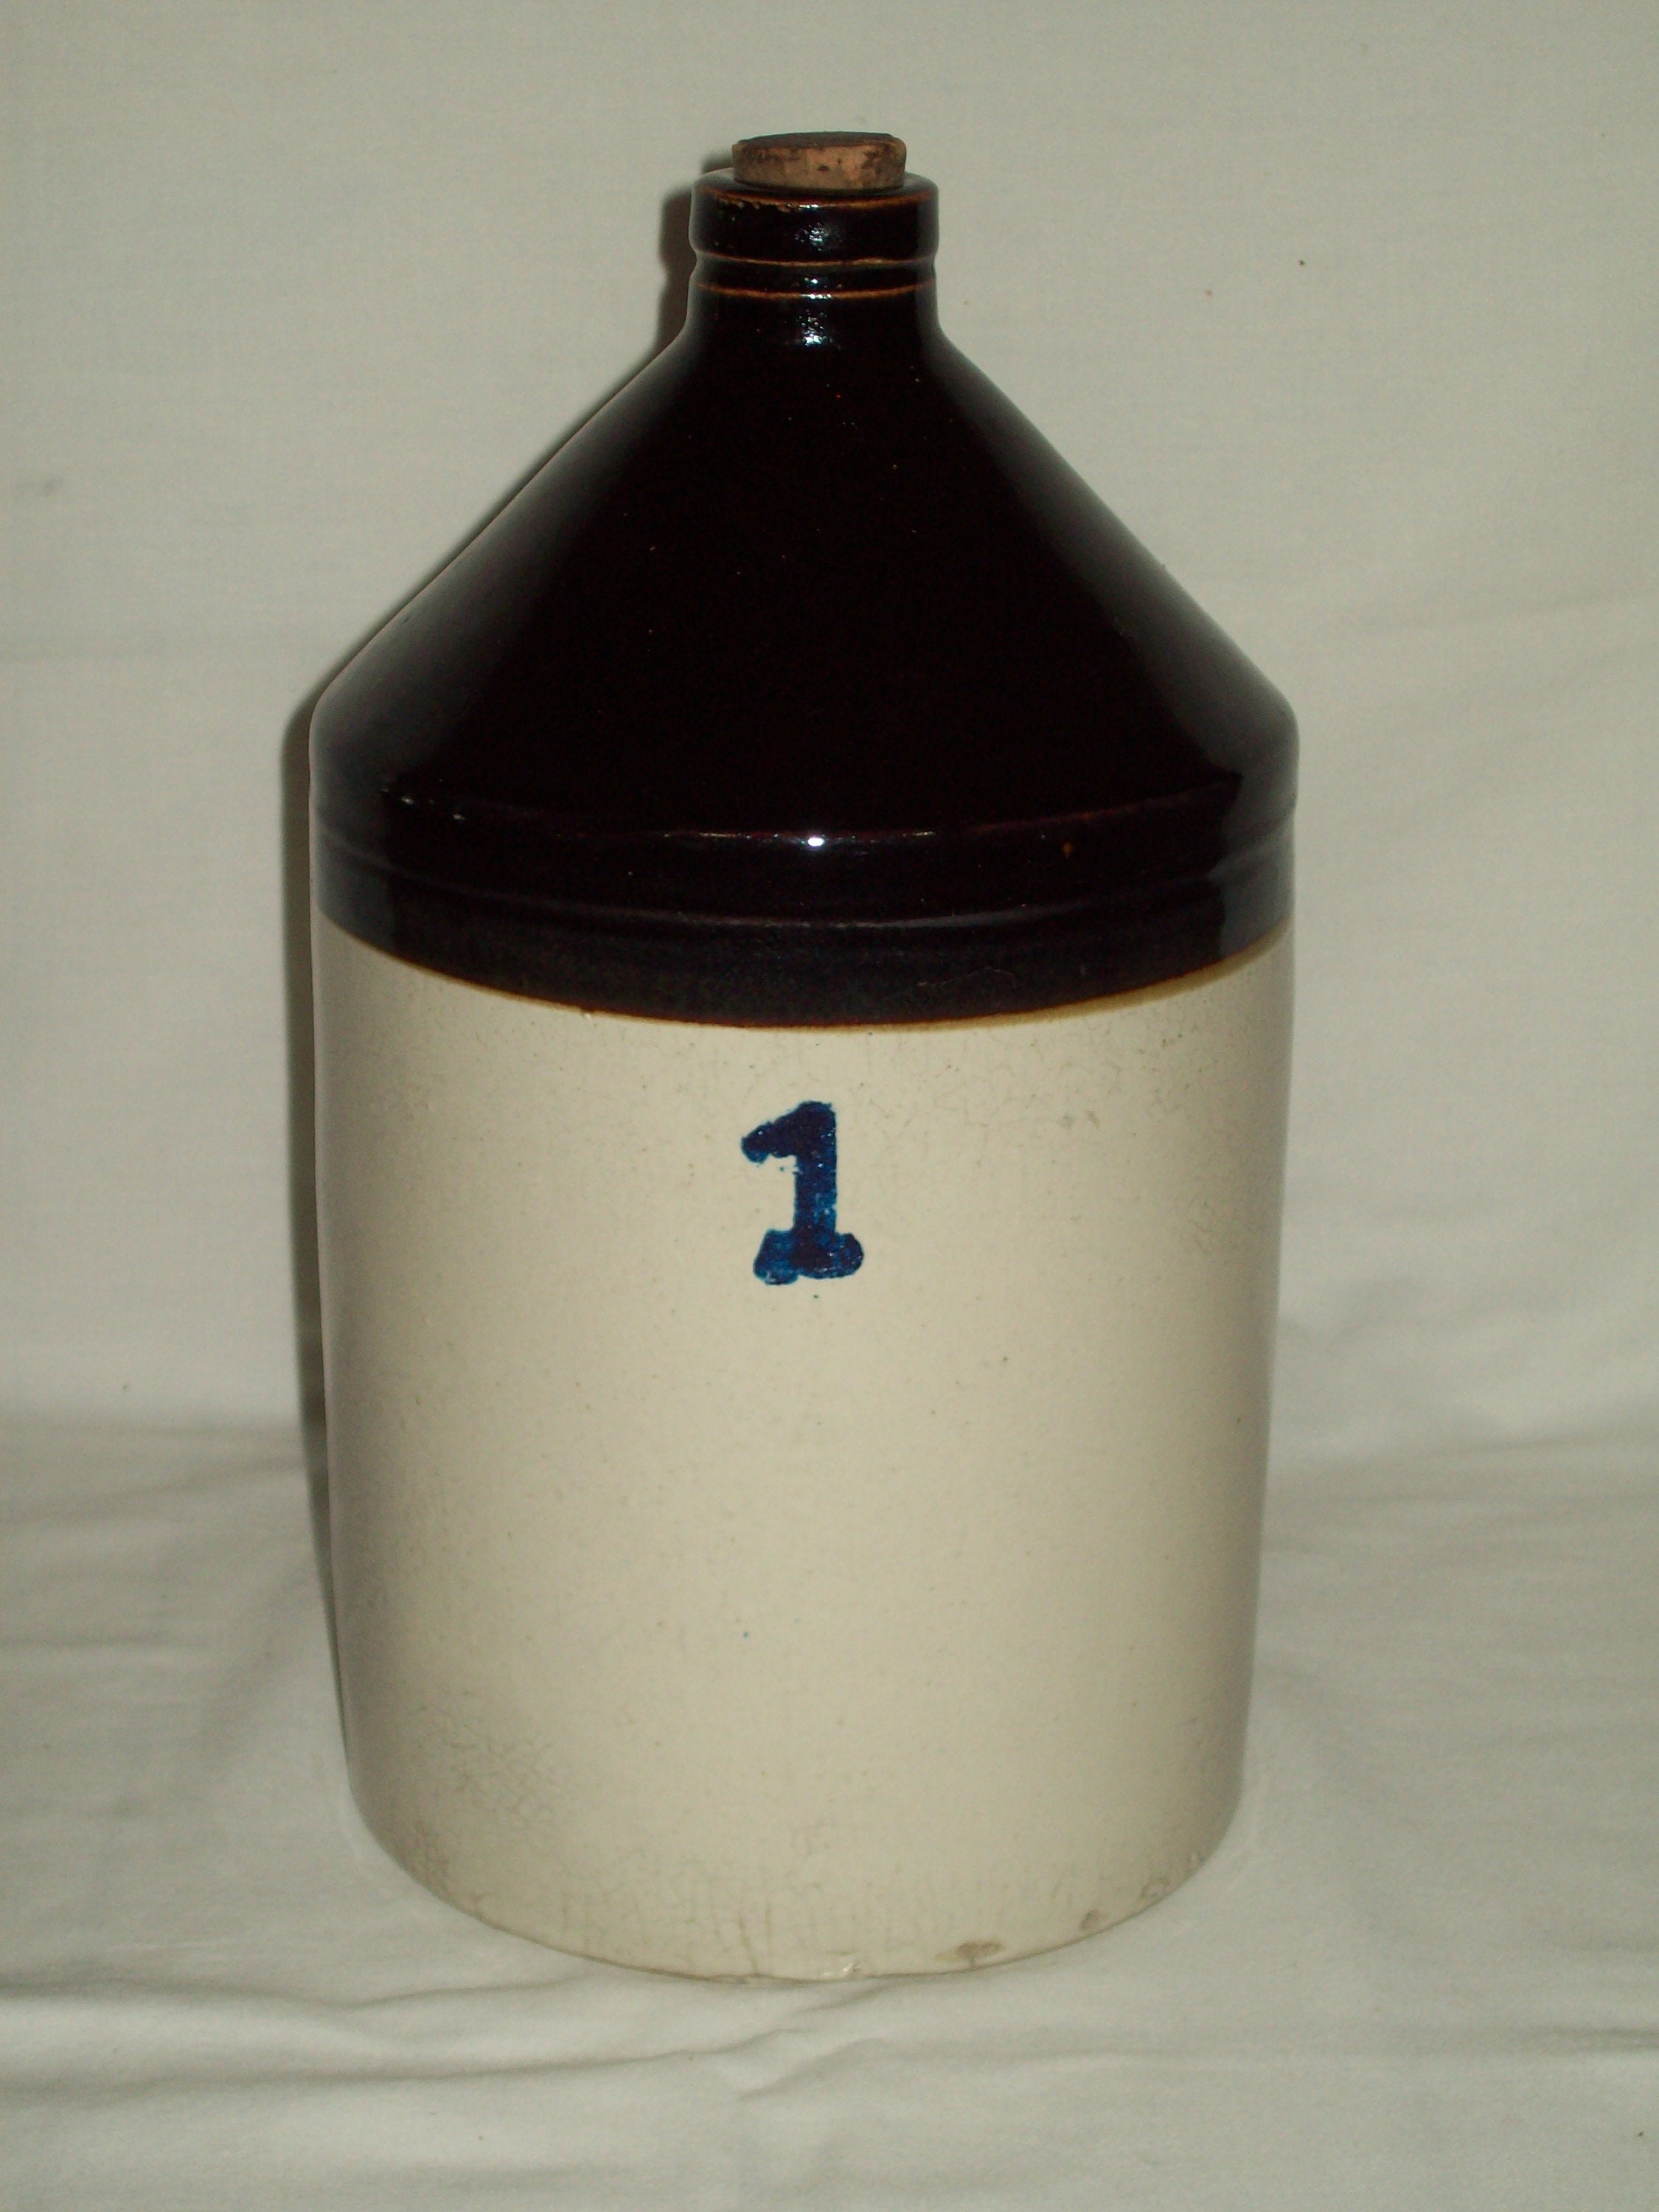 Circa 1870 6 Gallon Midwestern Stoneware Crock with Floral Bouquet #7413